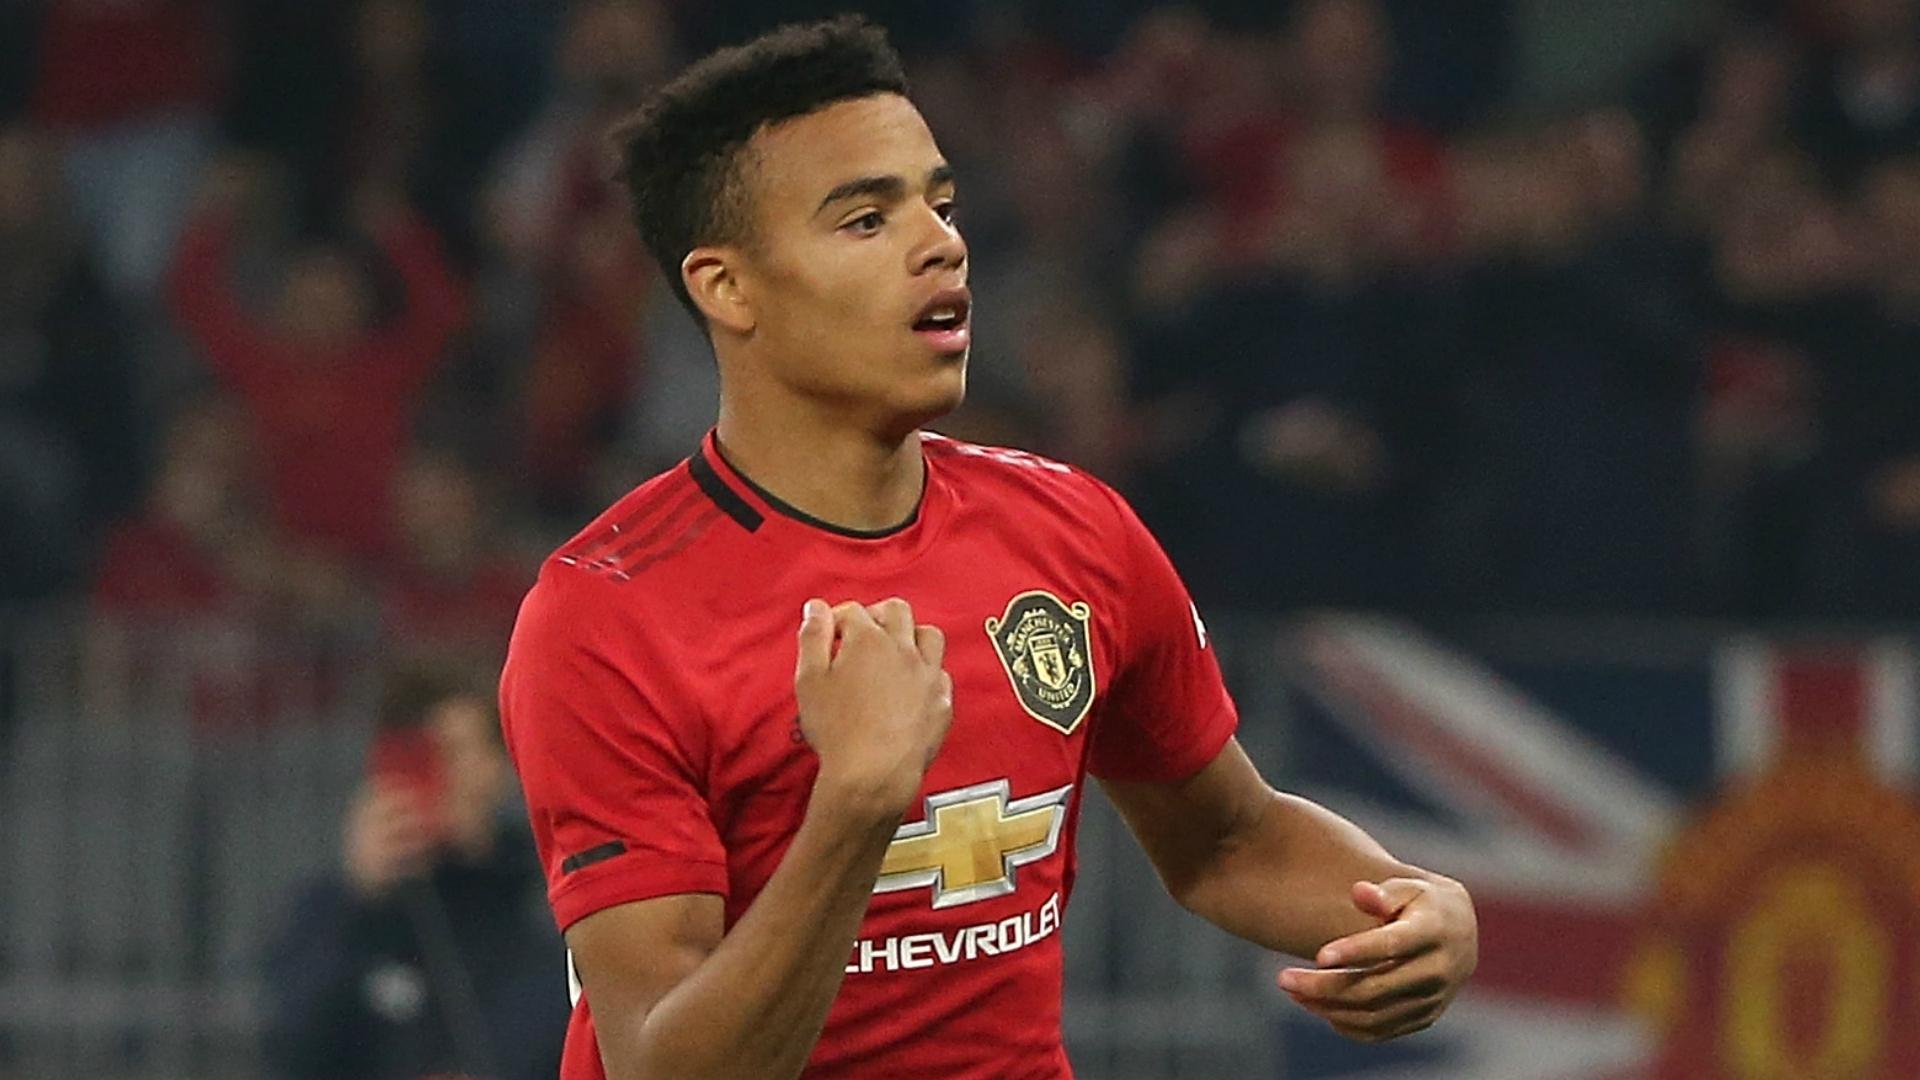 Mason Greenwood Wallpaper / Mason Greenwood Switches Numbers To Become